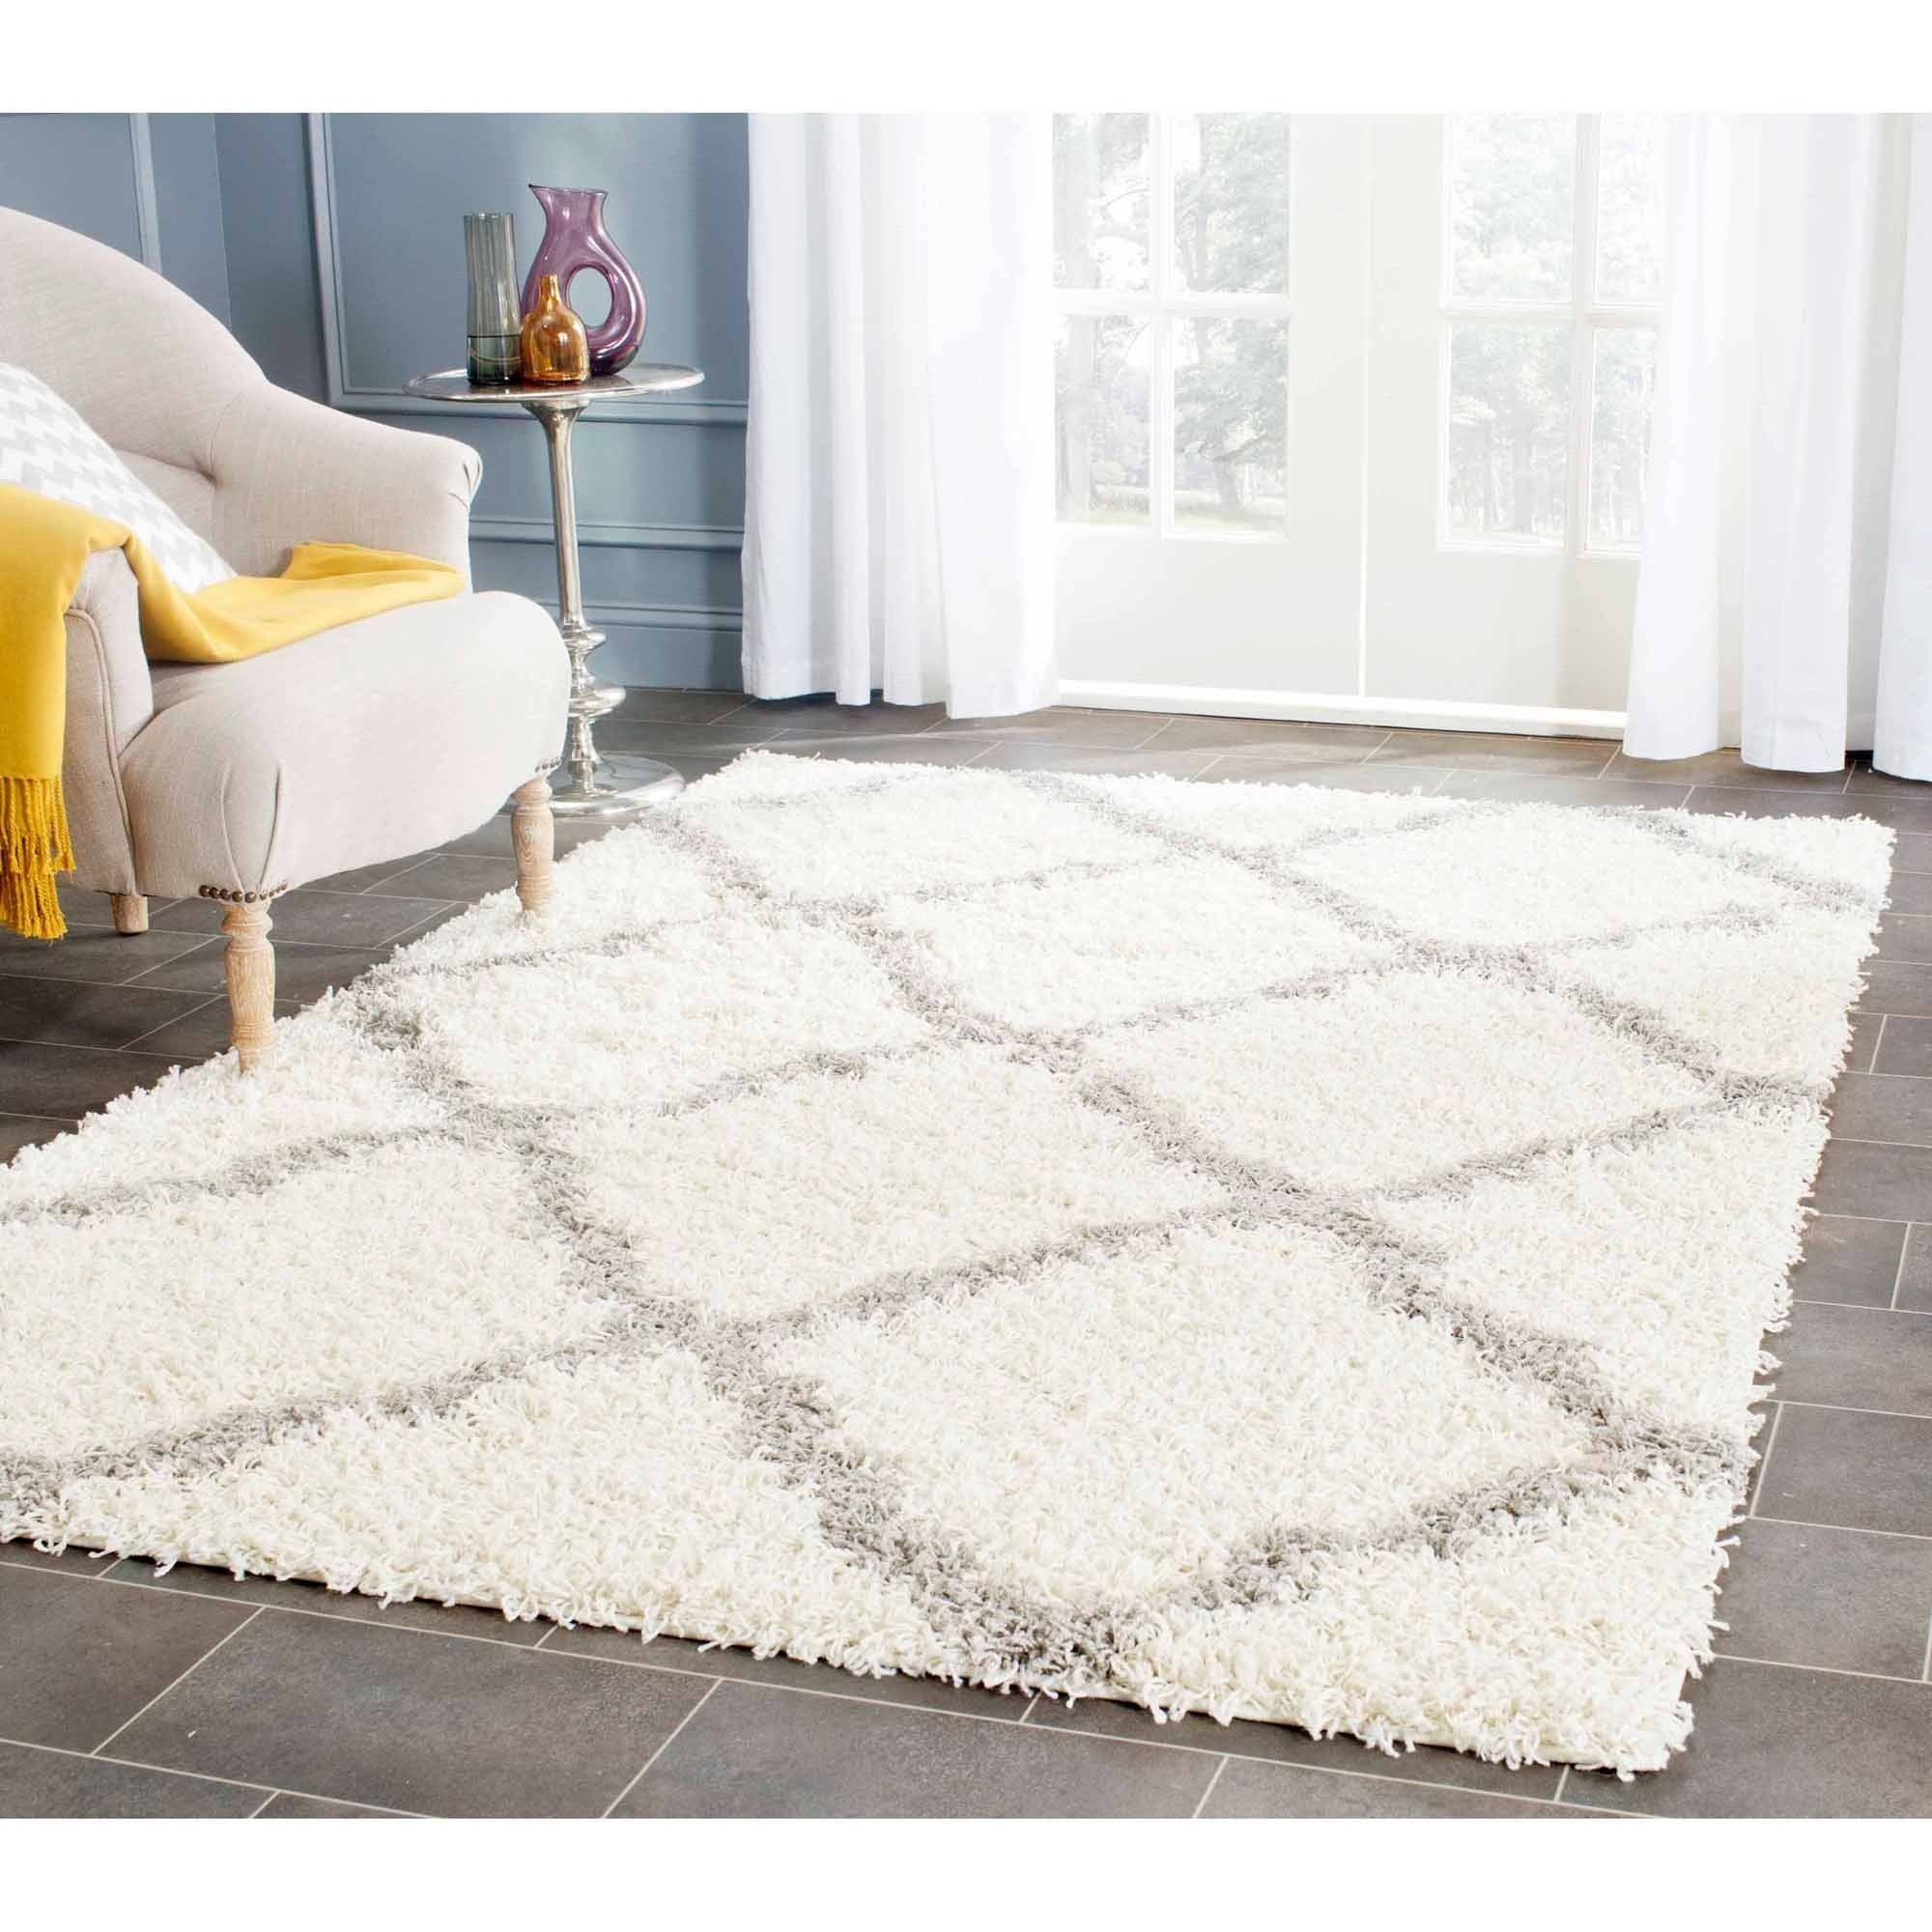 Elaborate your house spaces by filling some shag area rugs